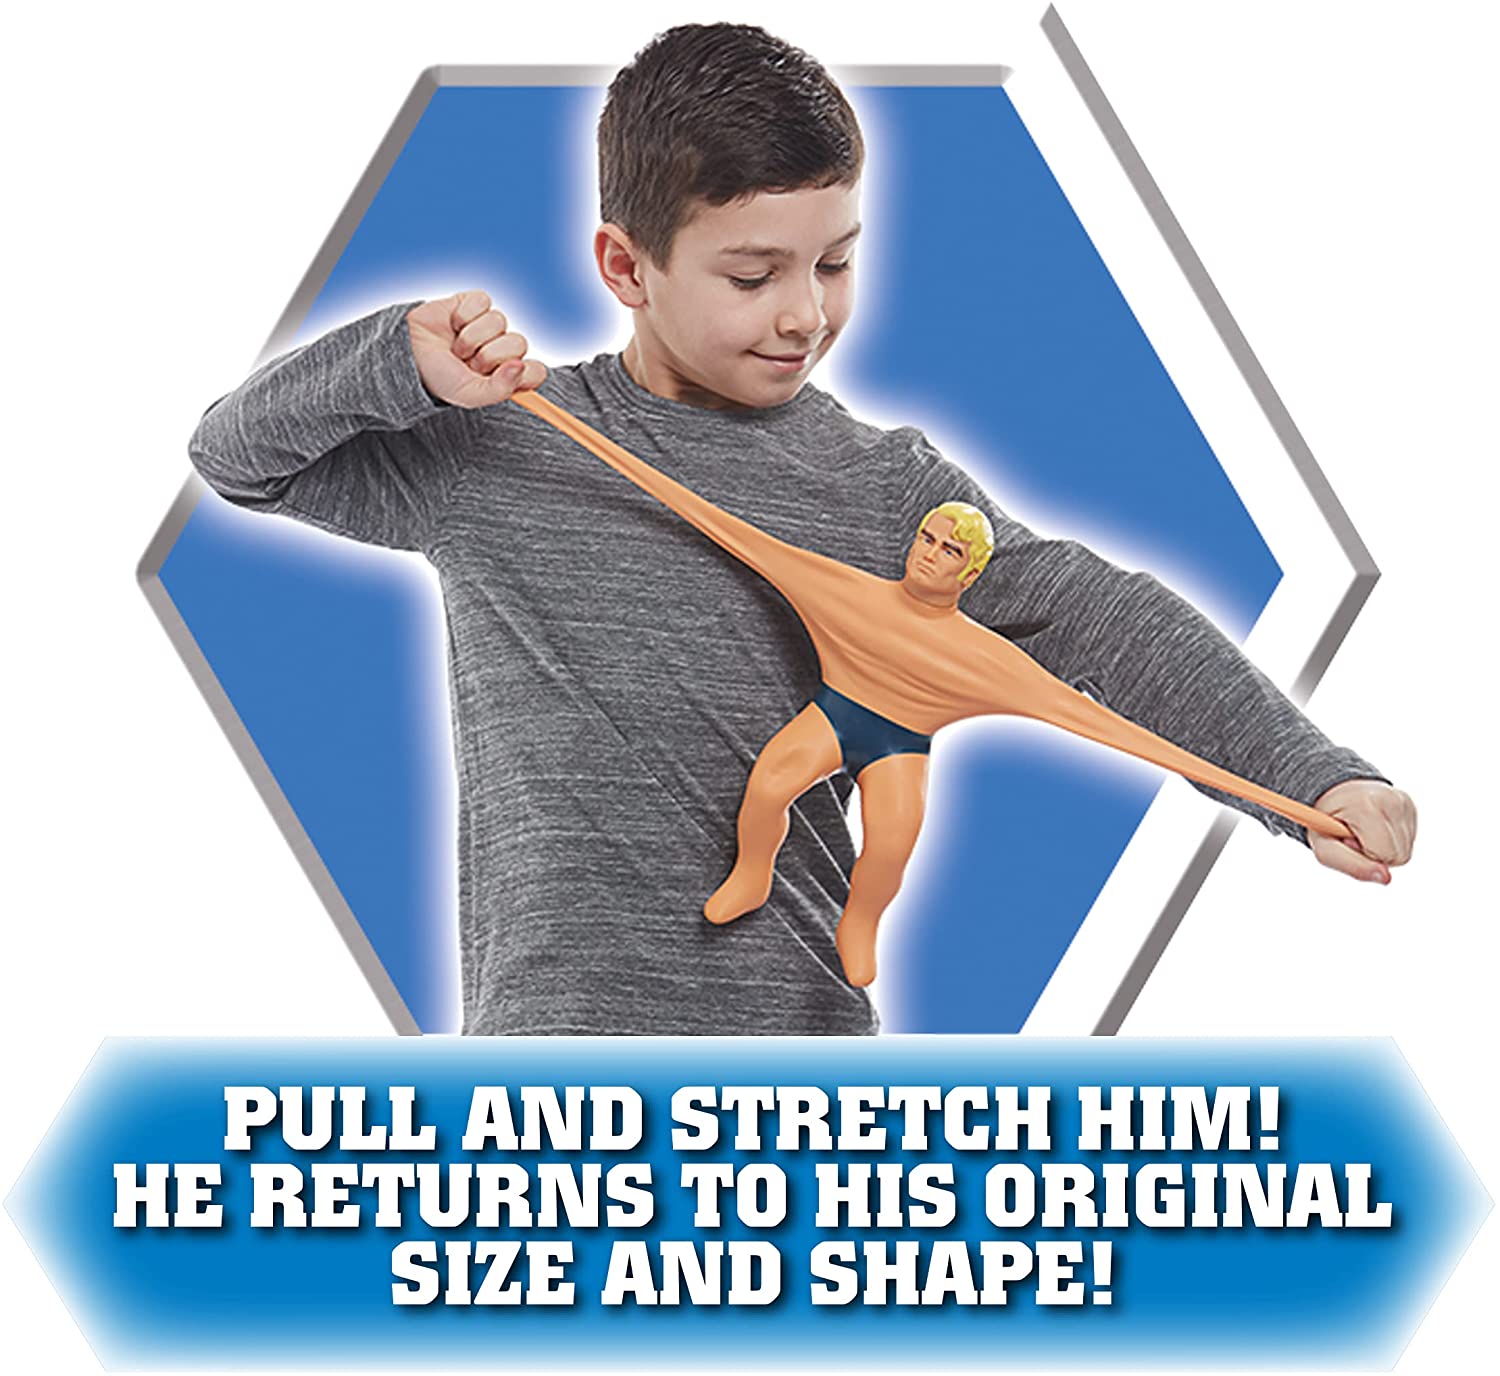 The Original Stretch Armstrong Retro Super Stretchy Action Figure Toy - The  Online Toy Store